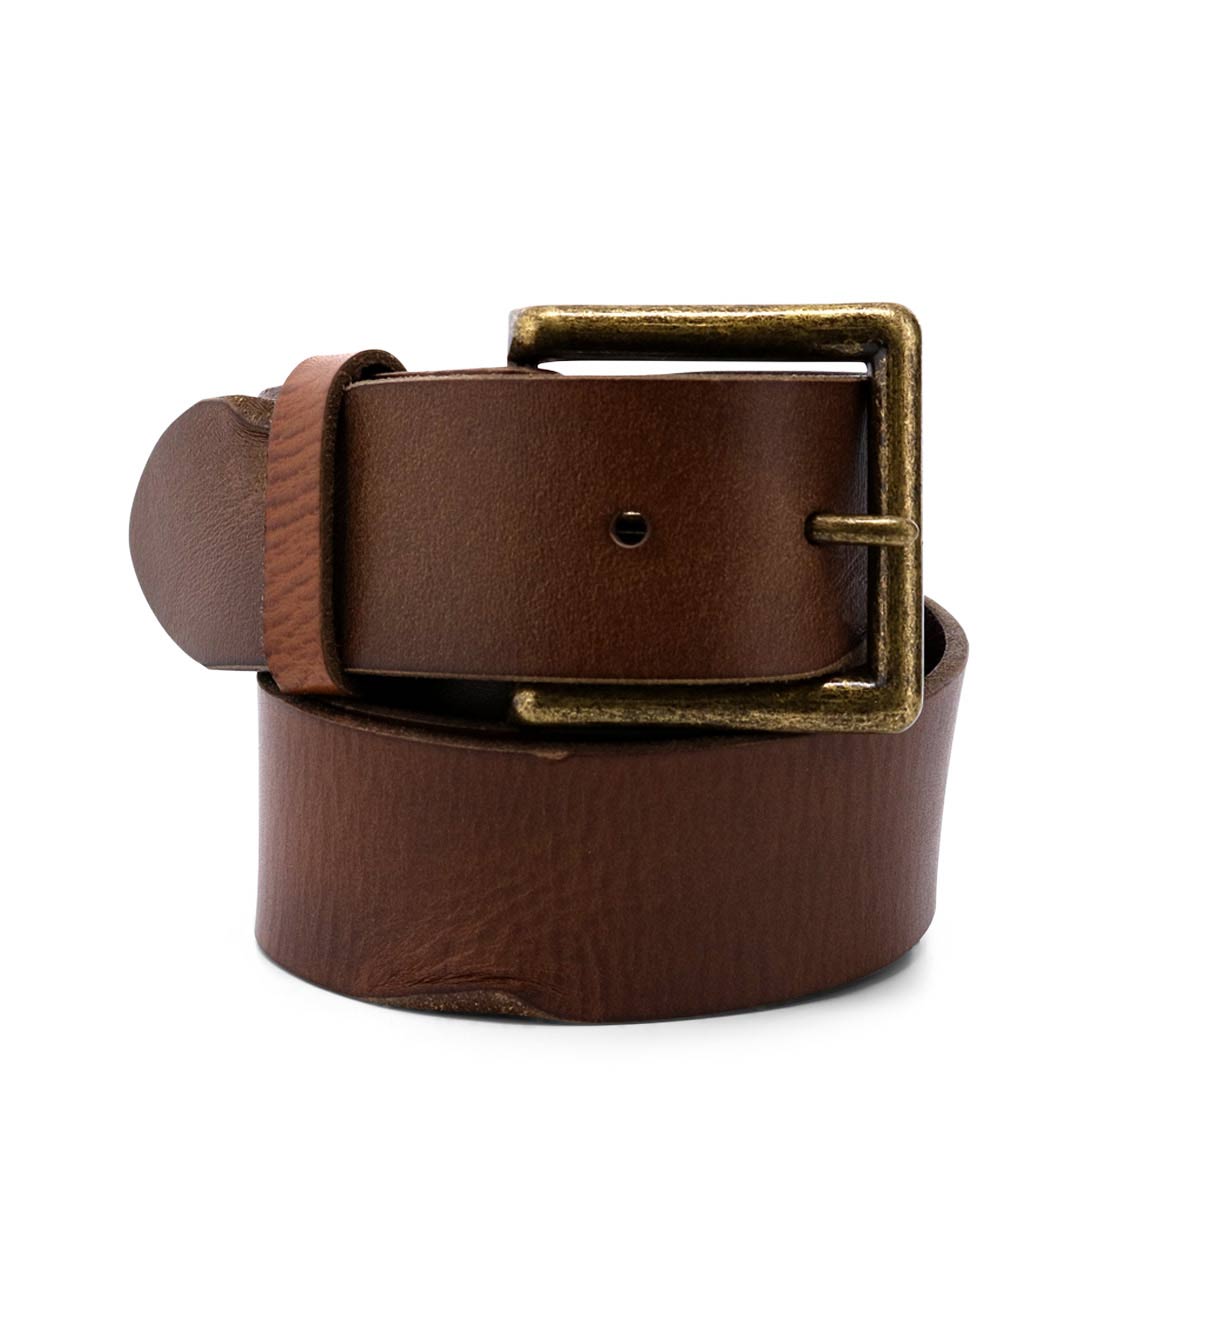 An Alex brown leather belt with a brass buckle from Bed Stu.